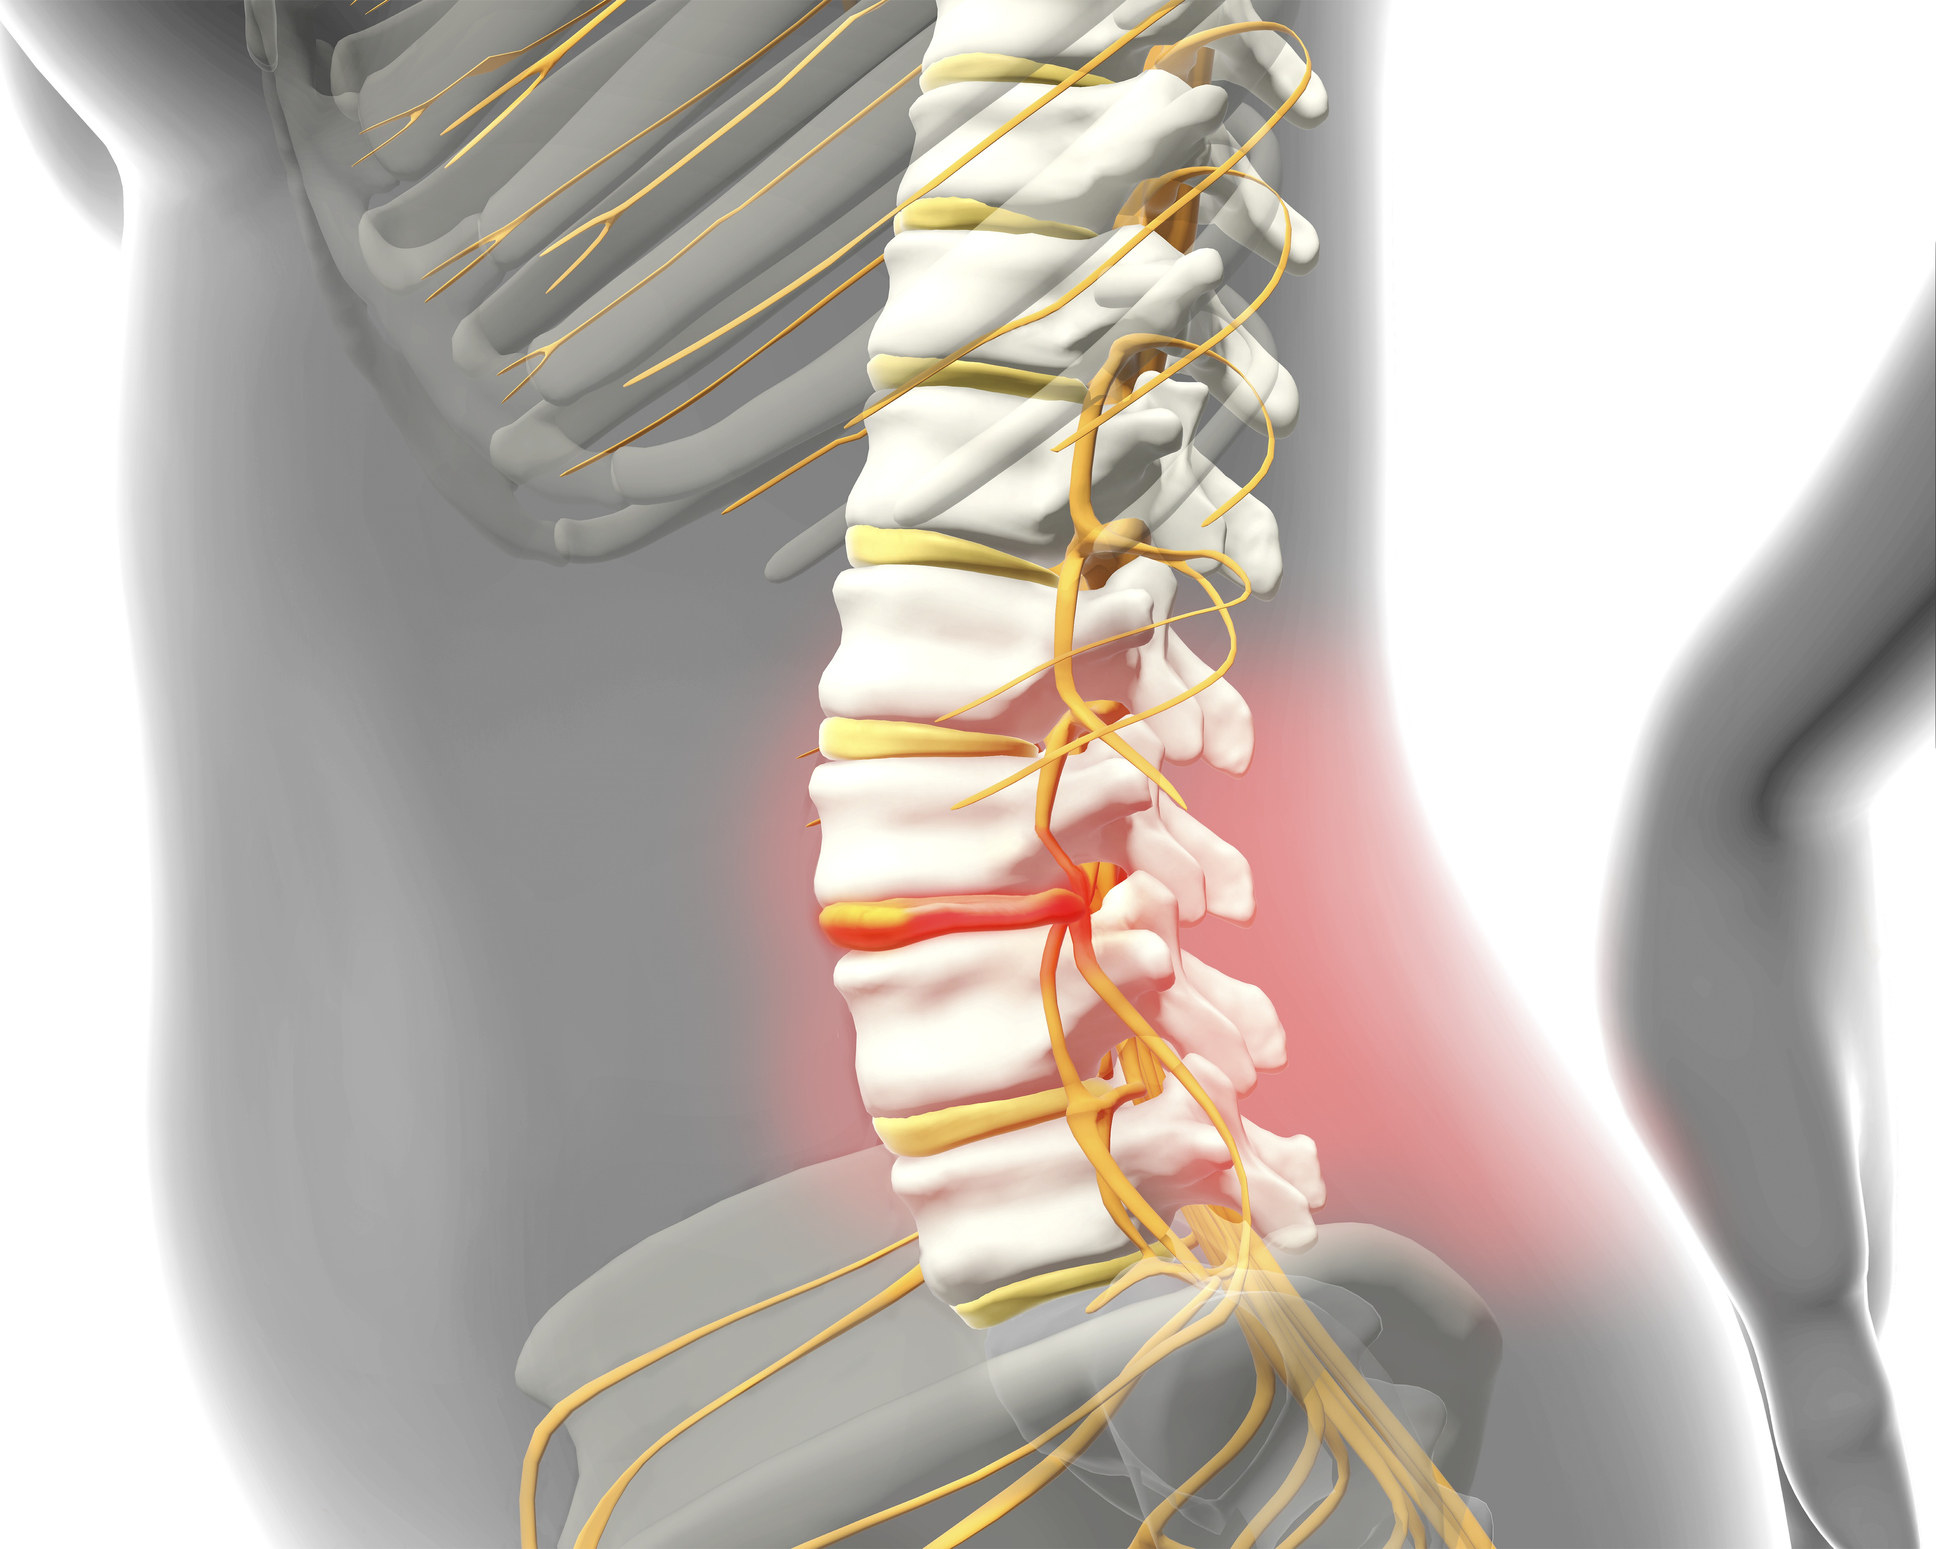 Outline of a spine